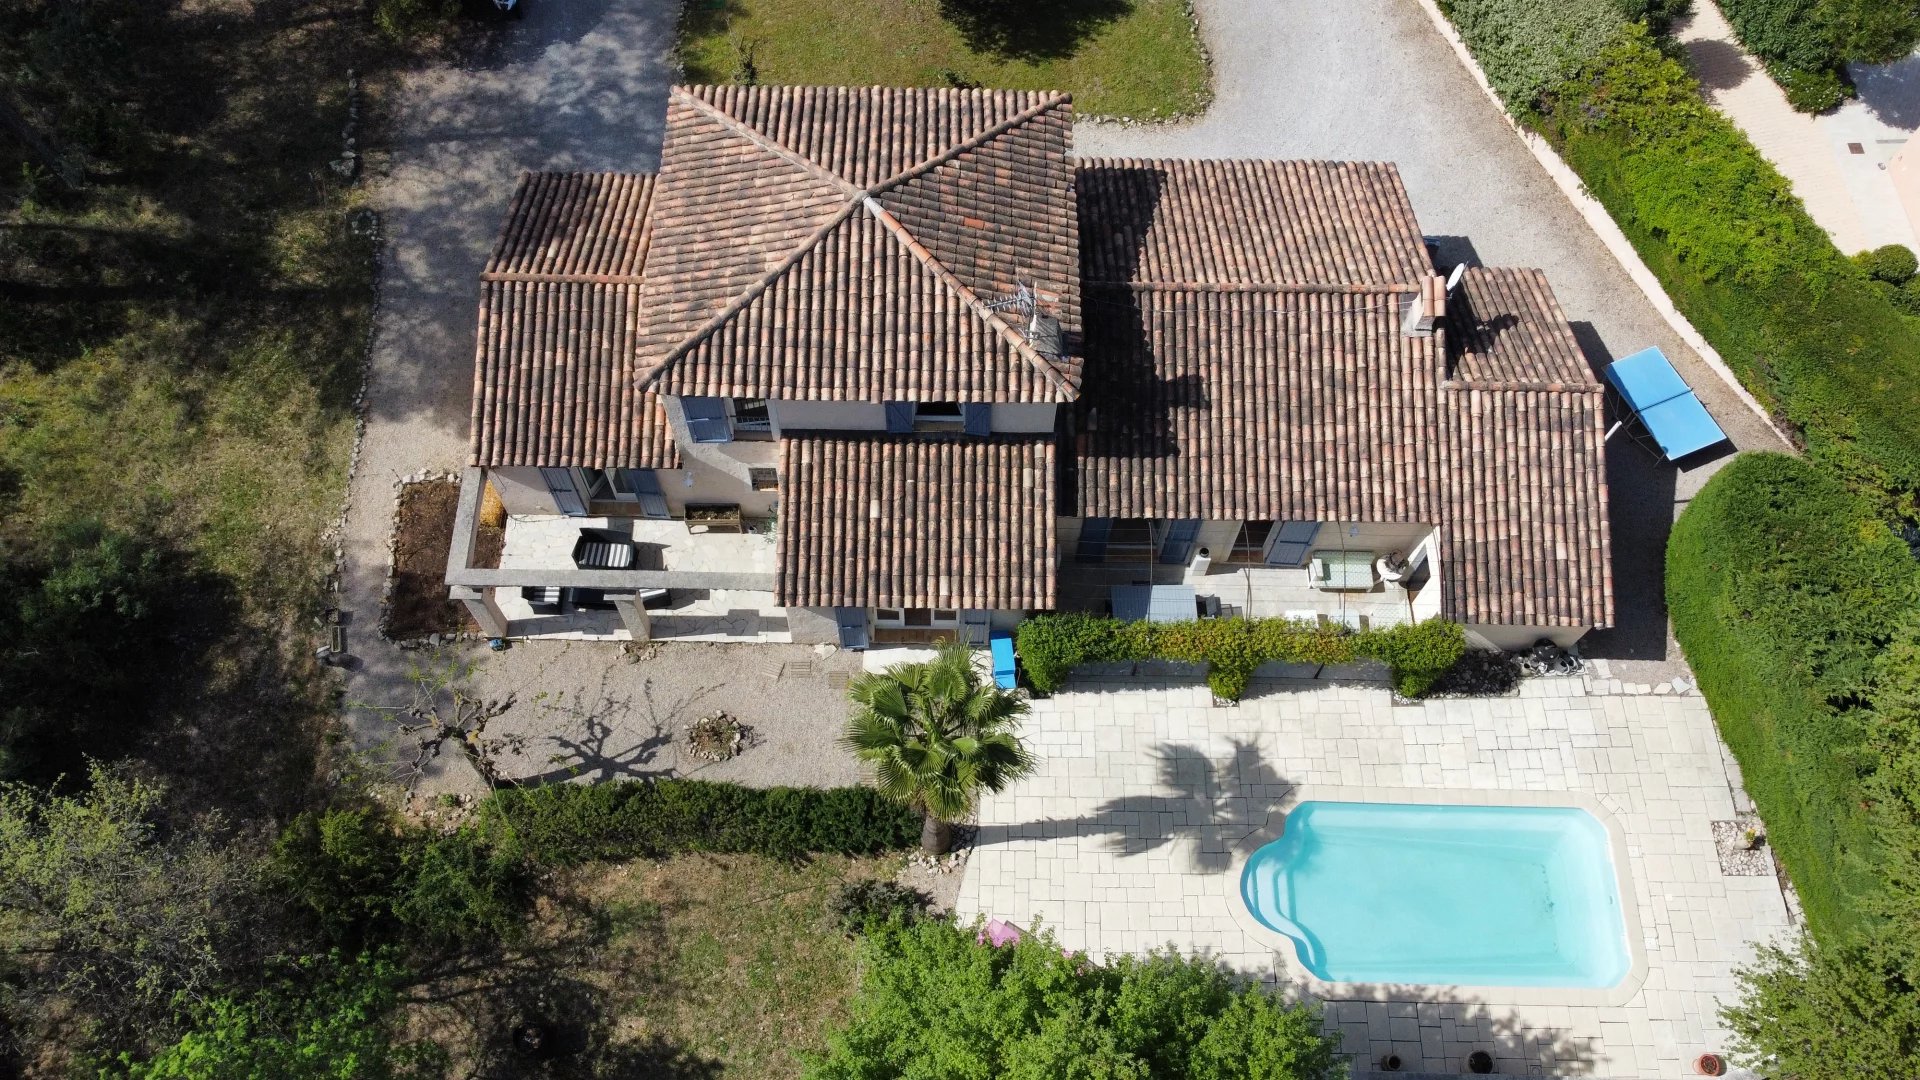 Well build house with 4 bedrooms and a pool - Fayence